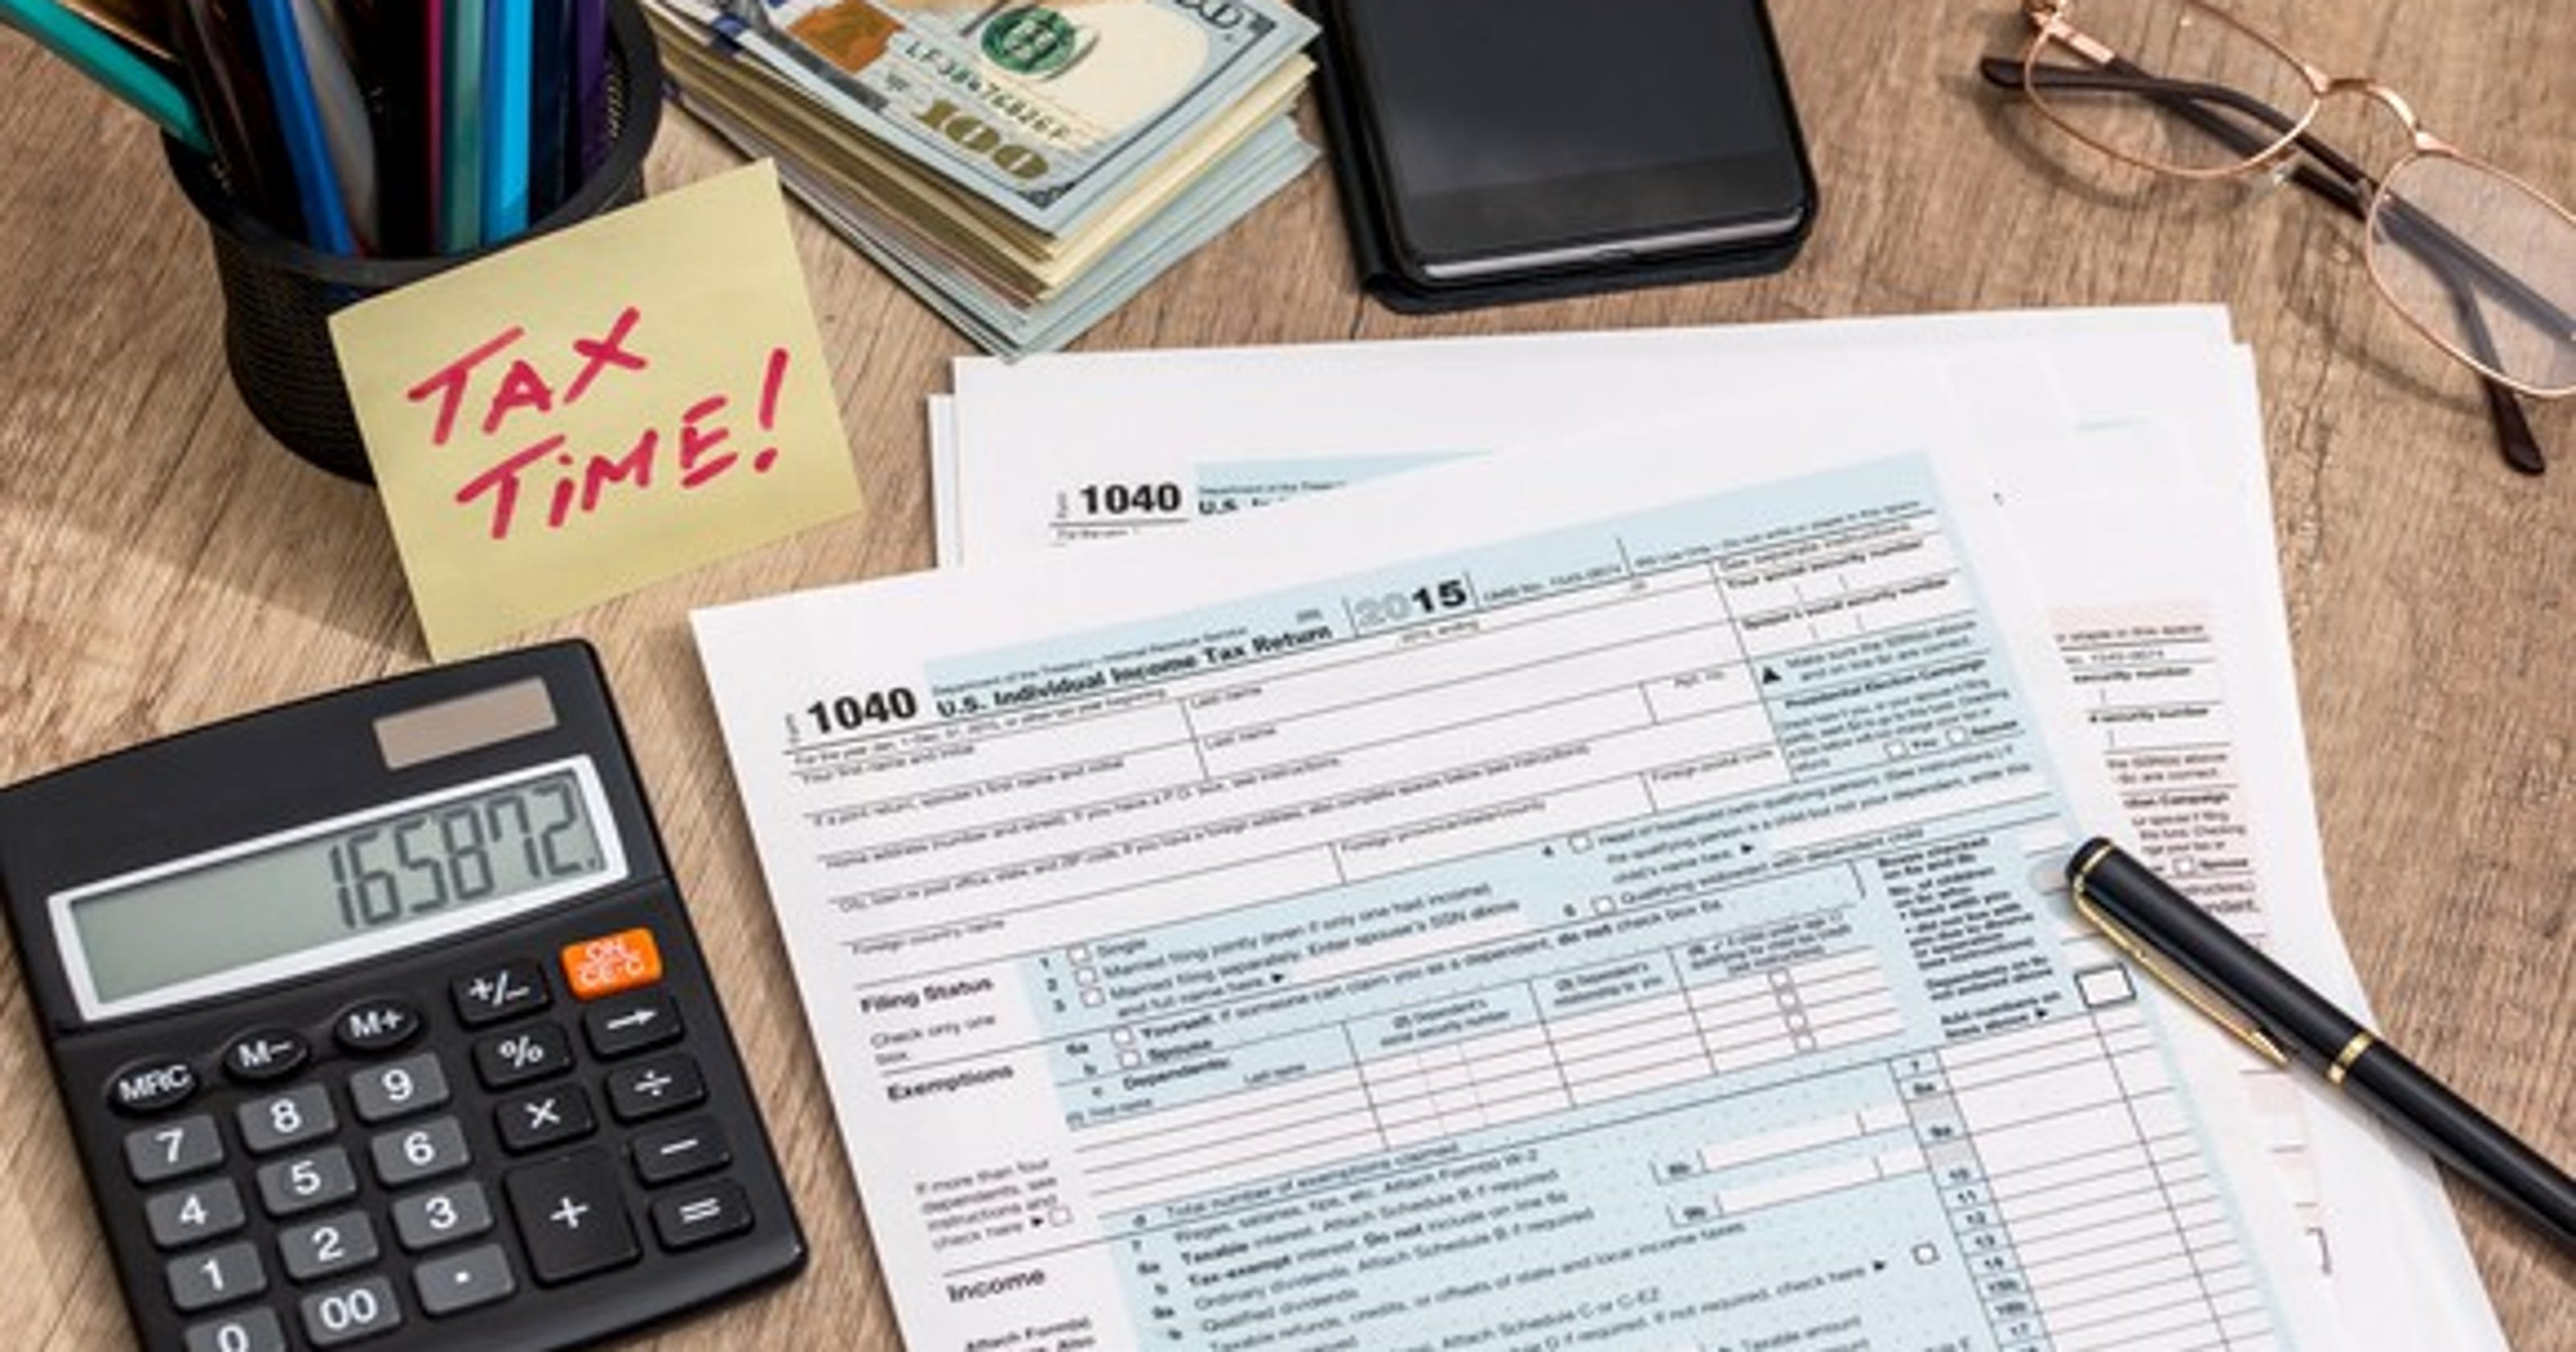 Taxes 2019 Online tax tools that can help you file returns